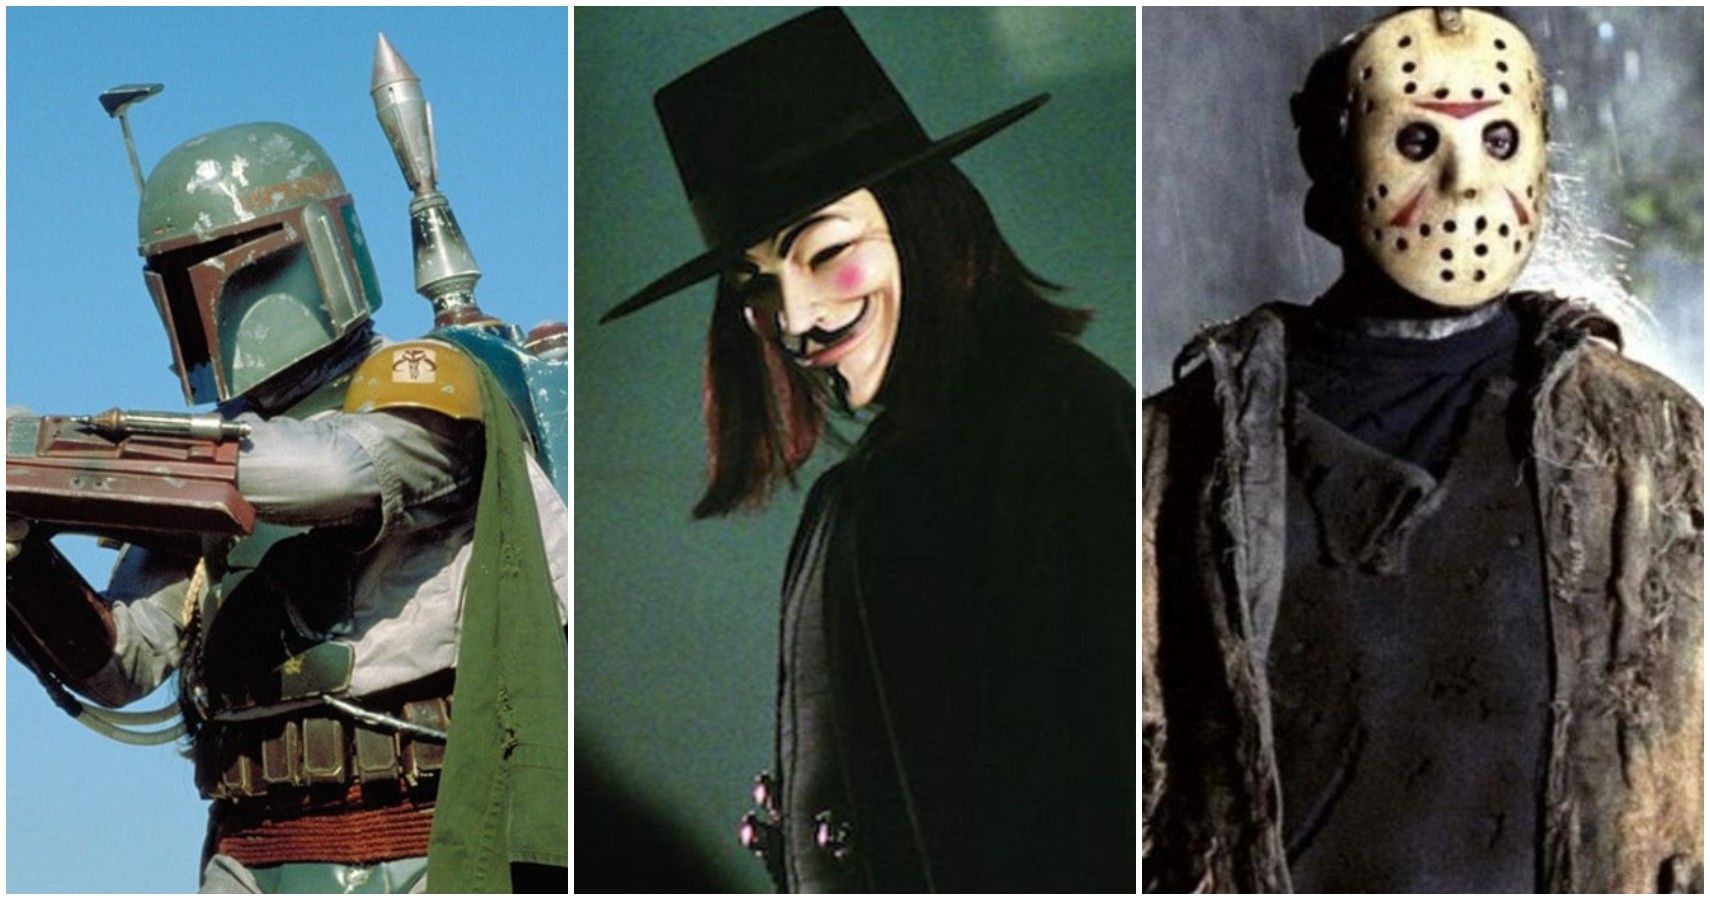 masked heroes and villains